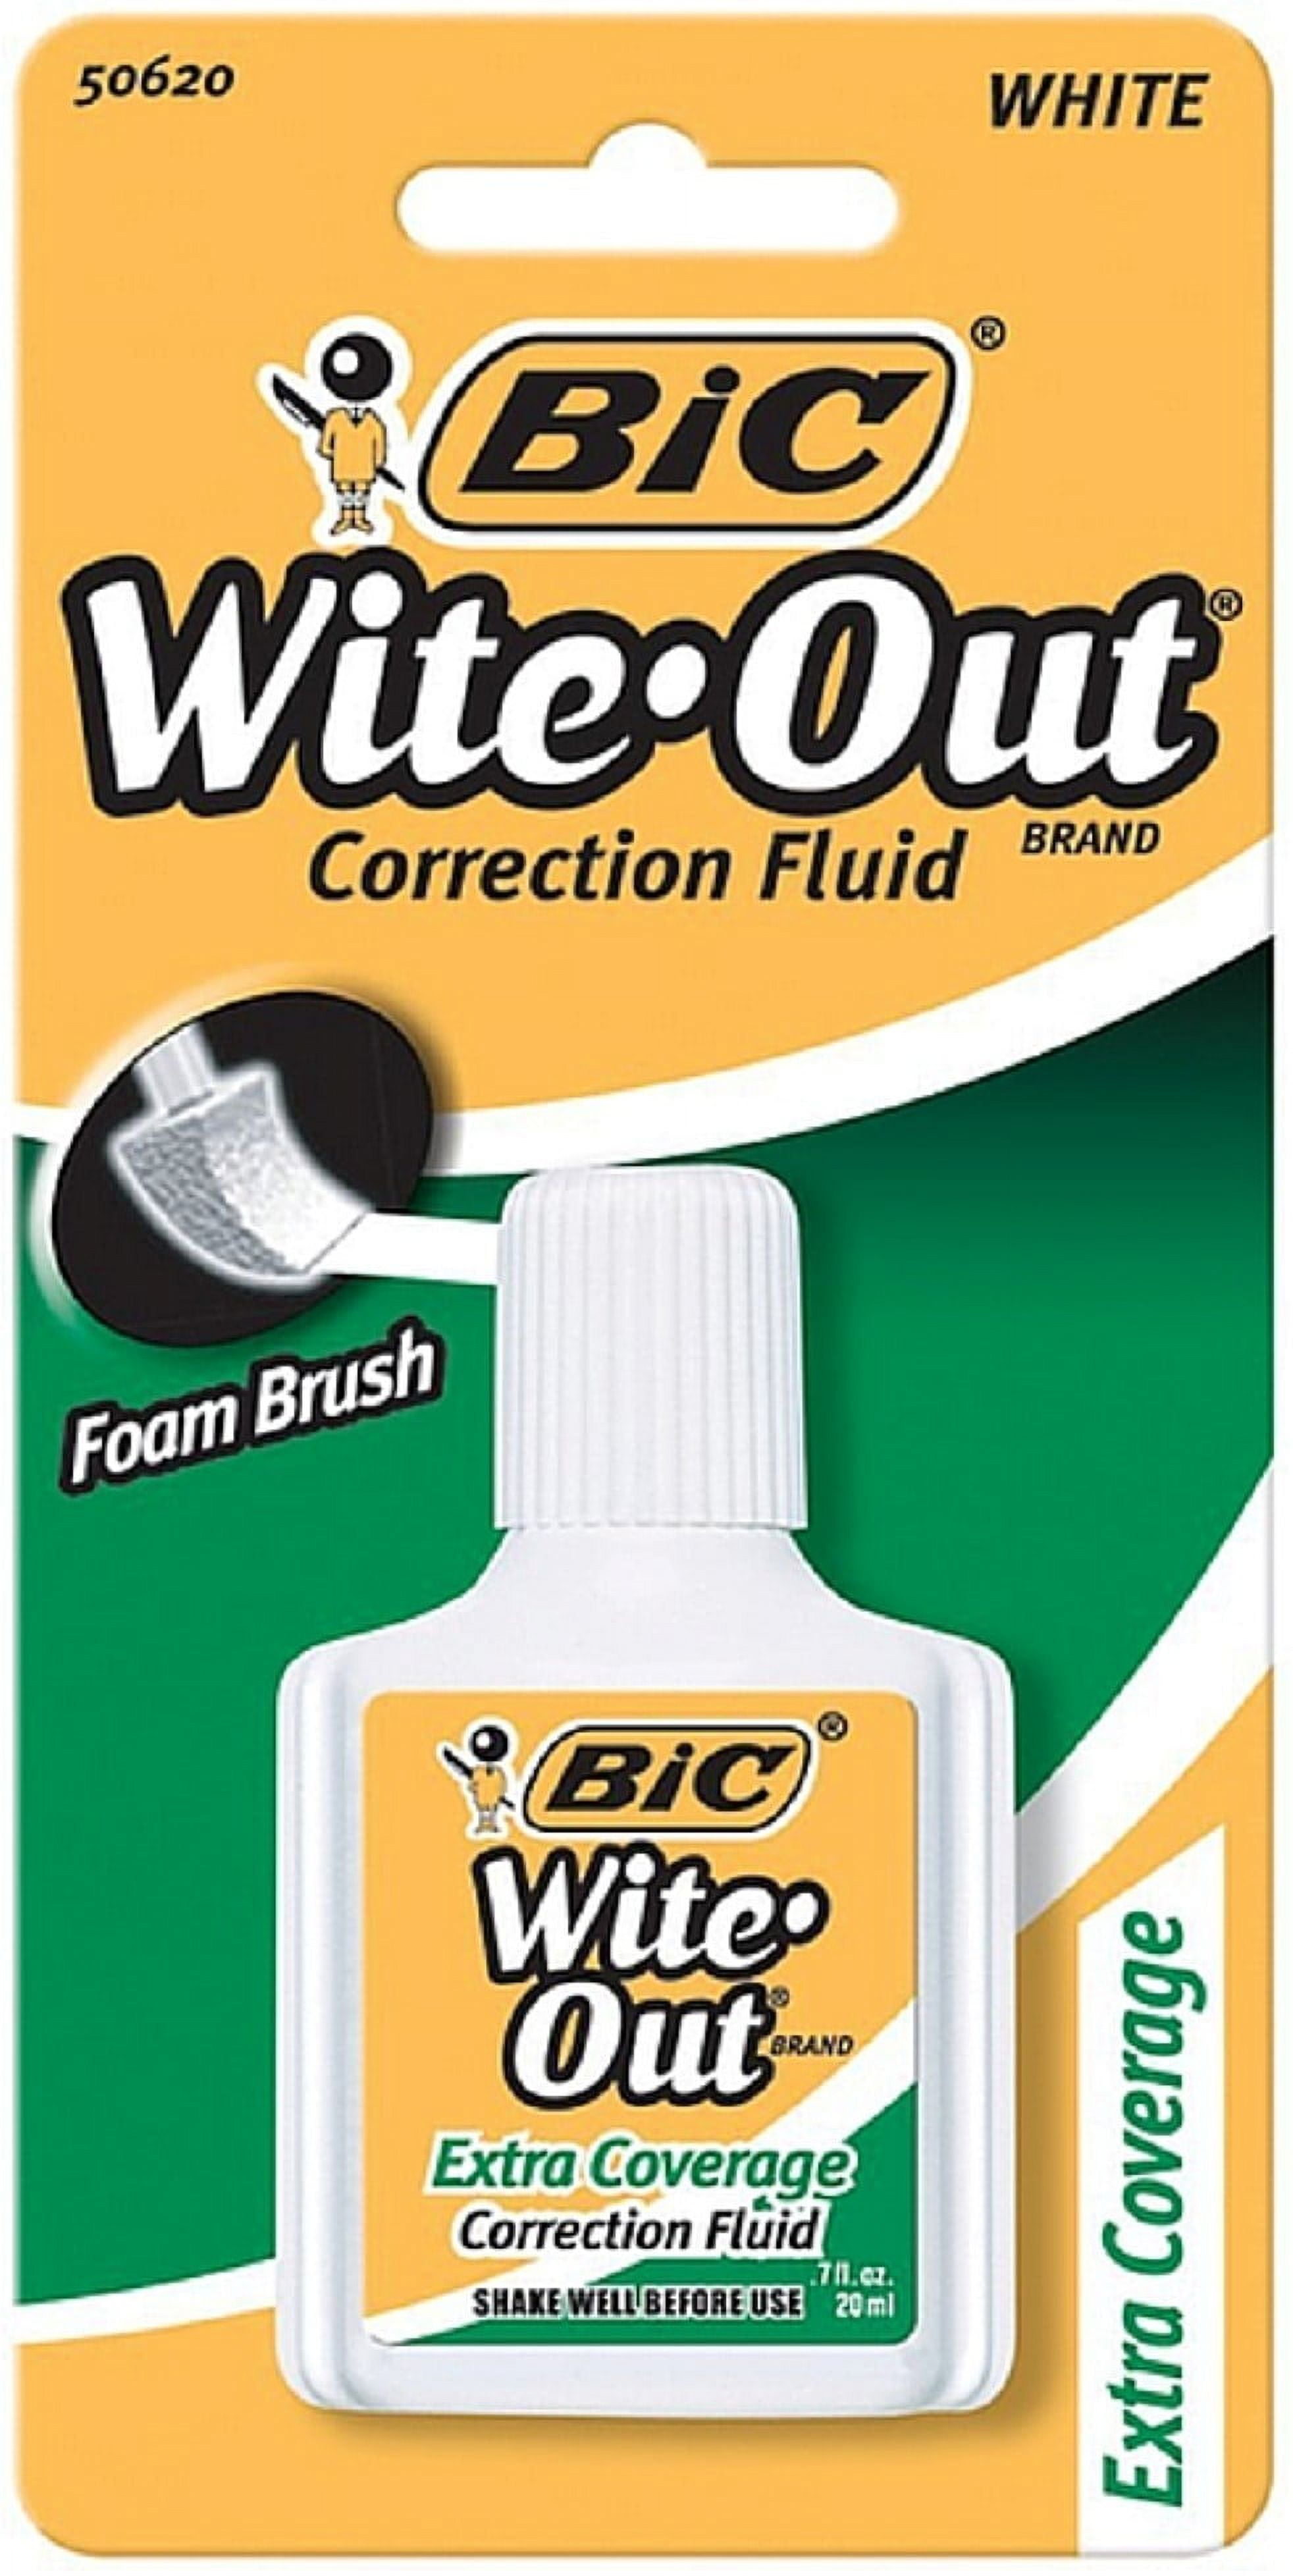 BiC Wite-Out Correction Fluid, Extra Coverage -  0.7 oz bottle